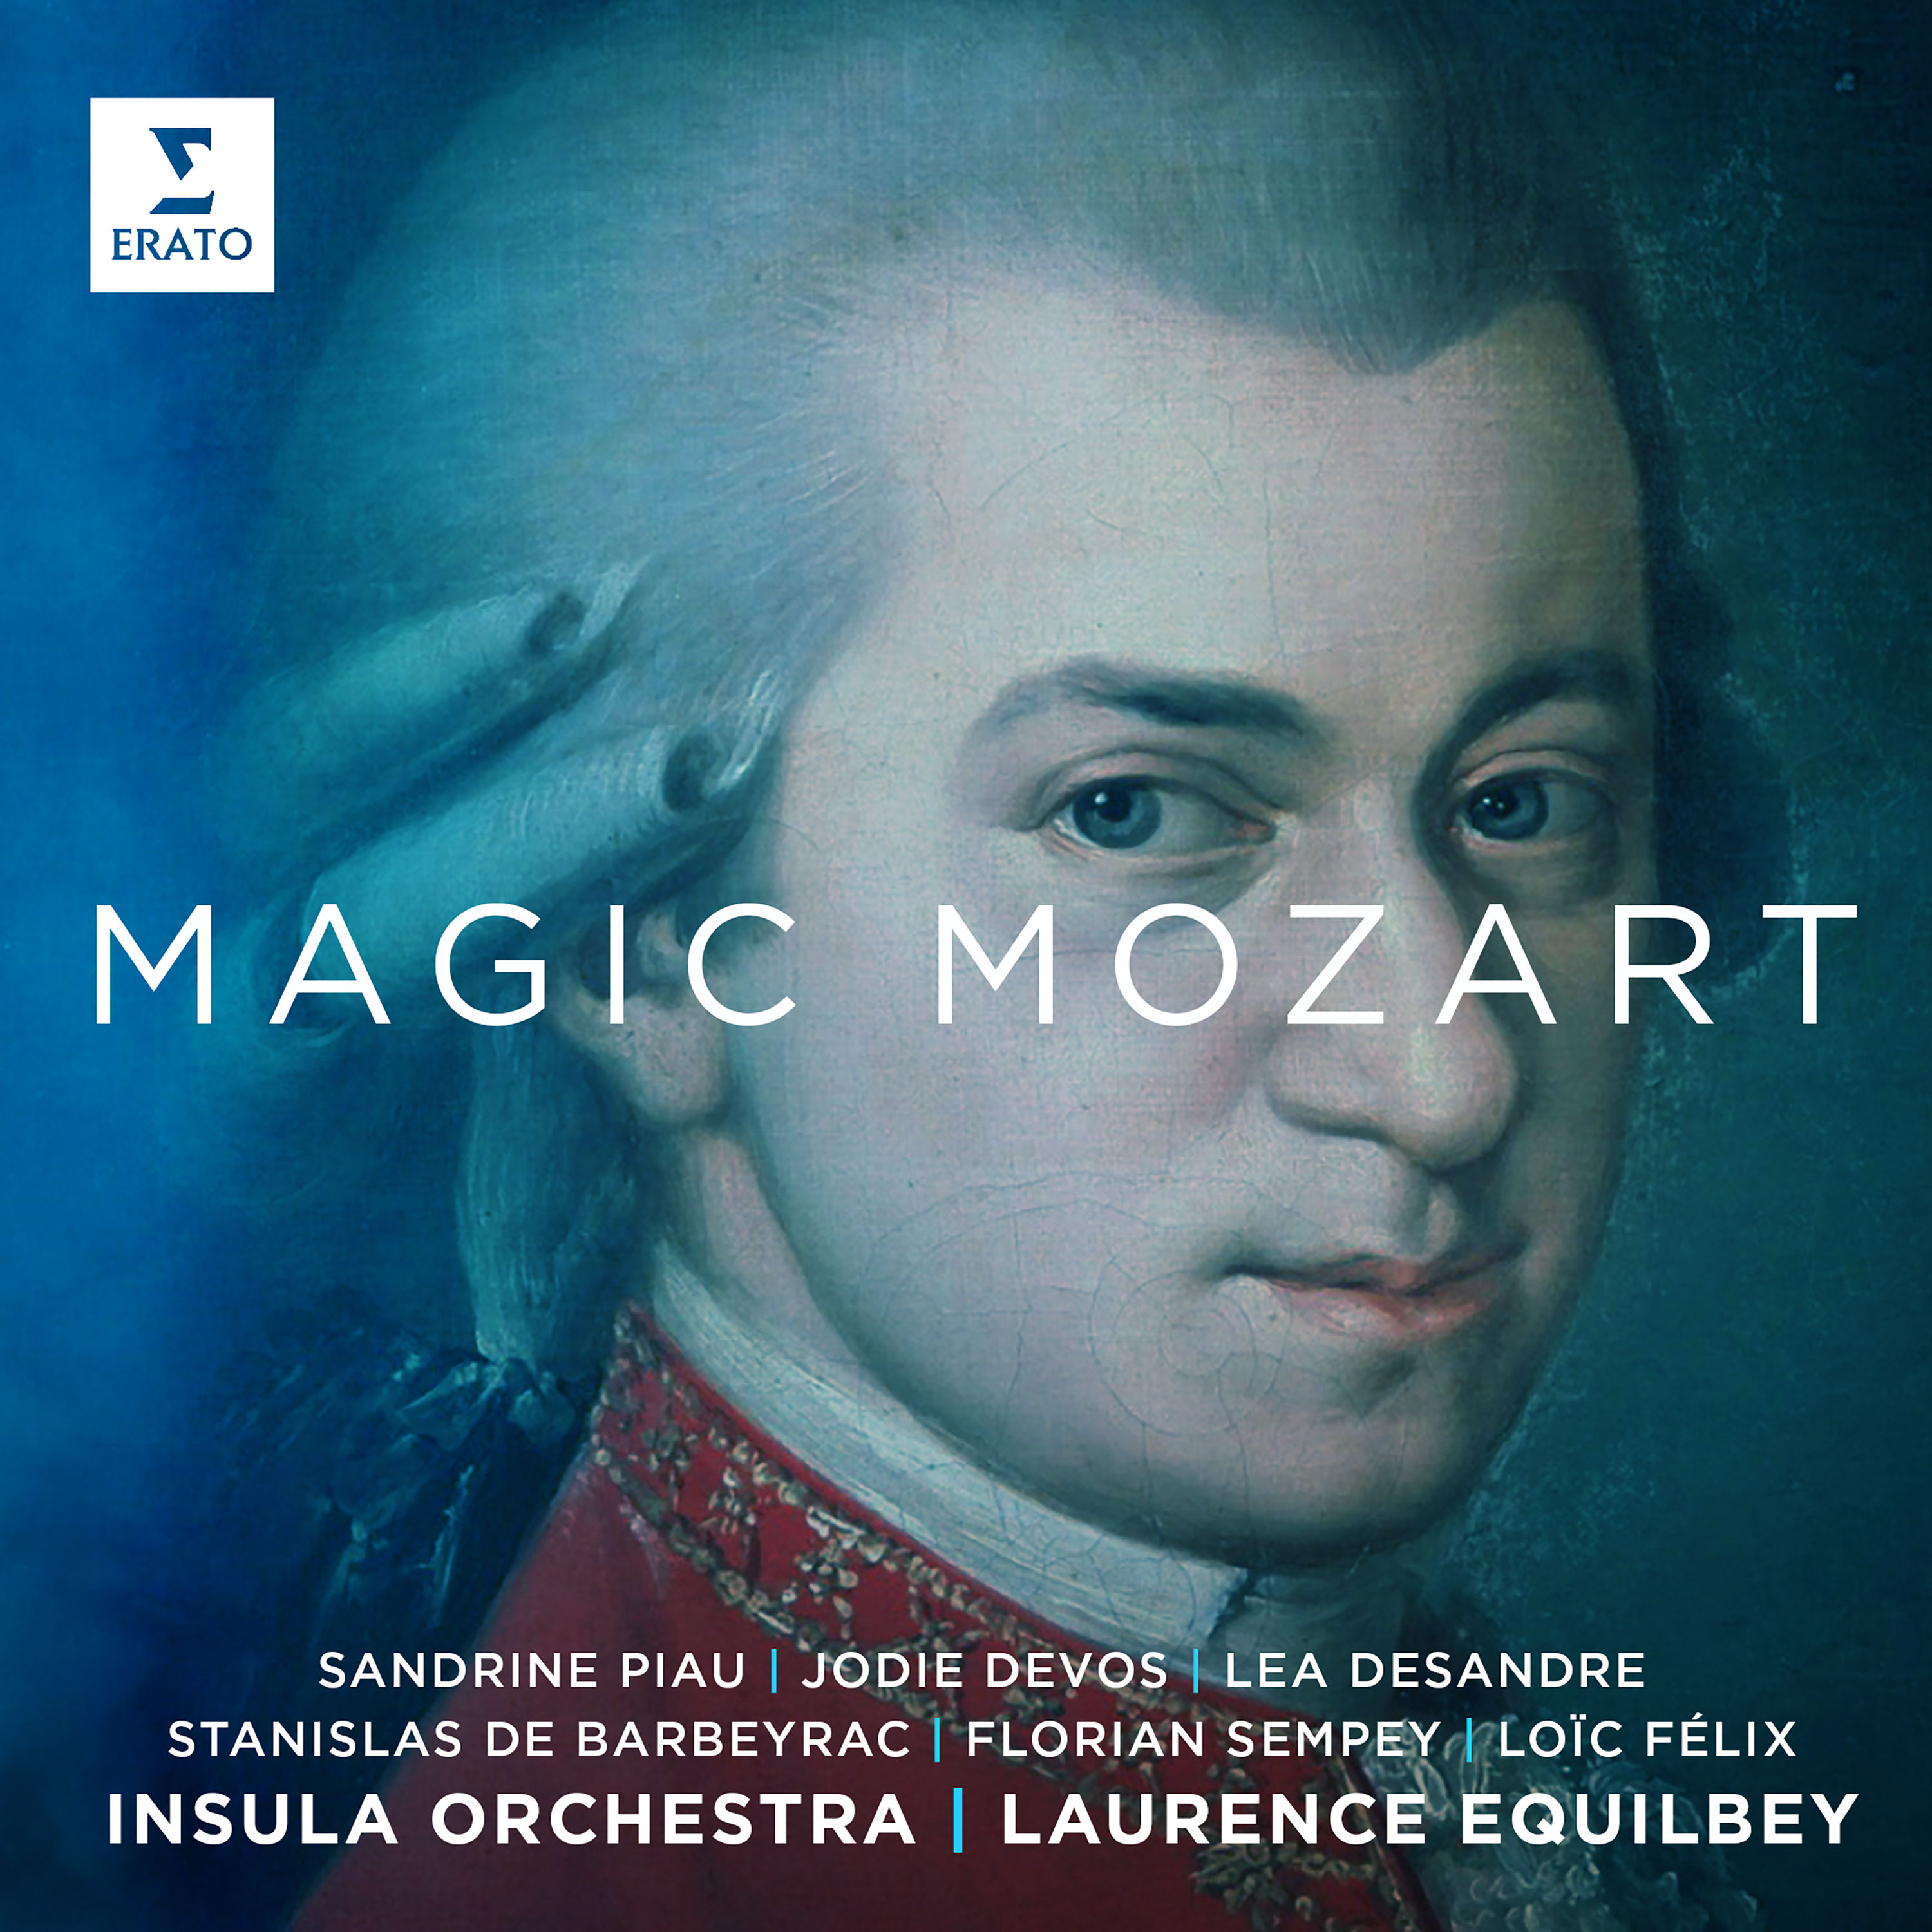 Laurence Equilbey & Insula Orchestra - Magic Mozart (2020) [FLAC 24bit/96kHz]